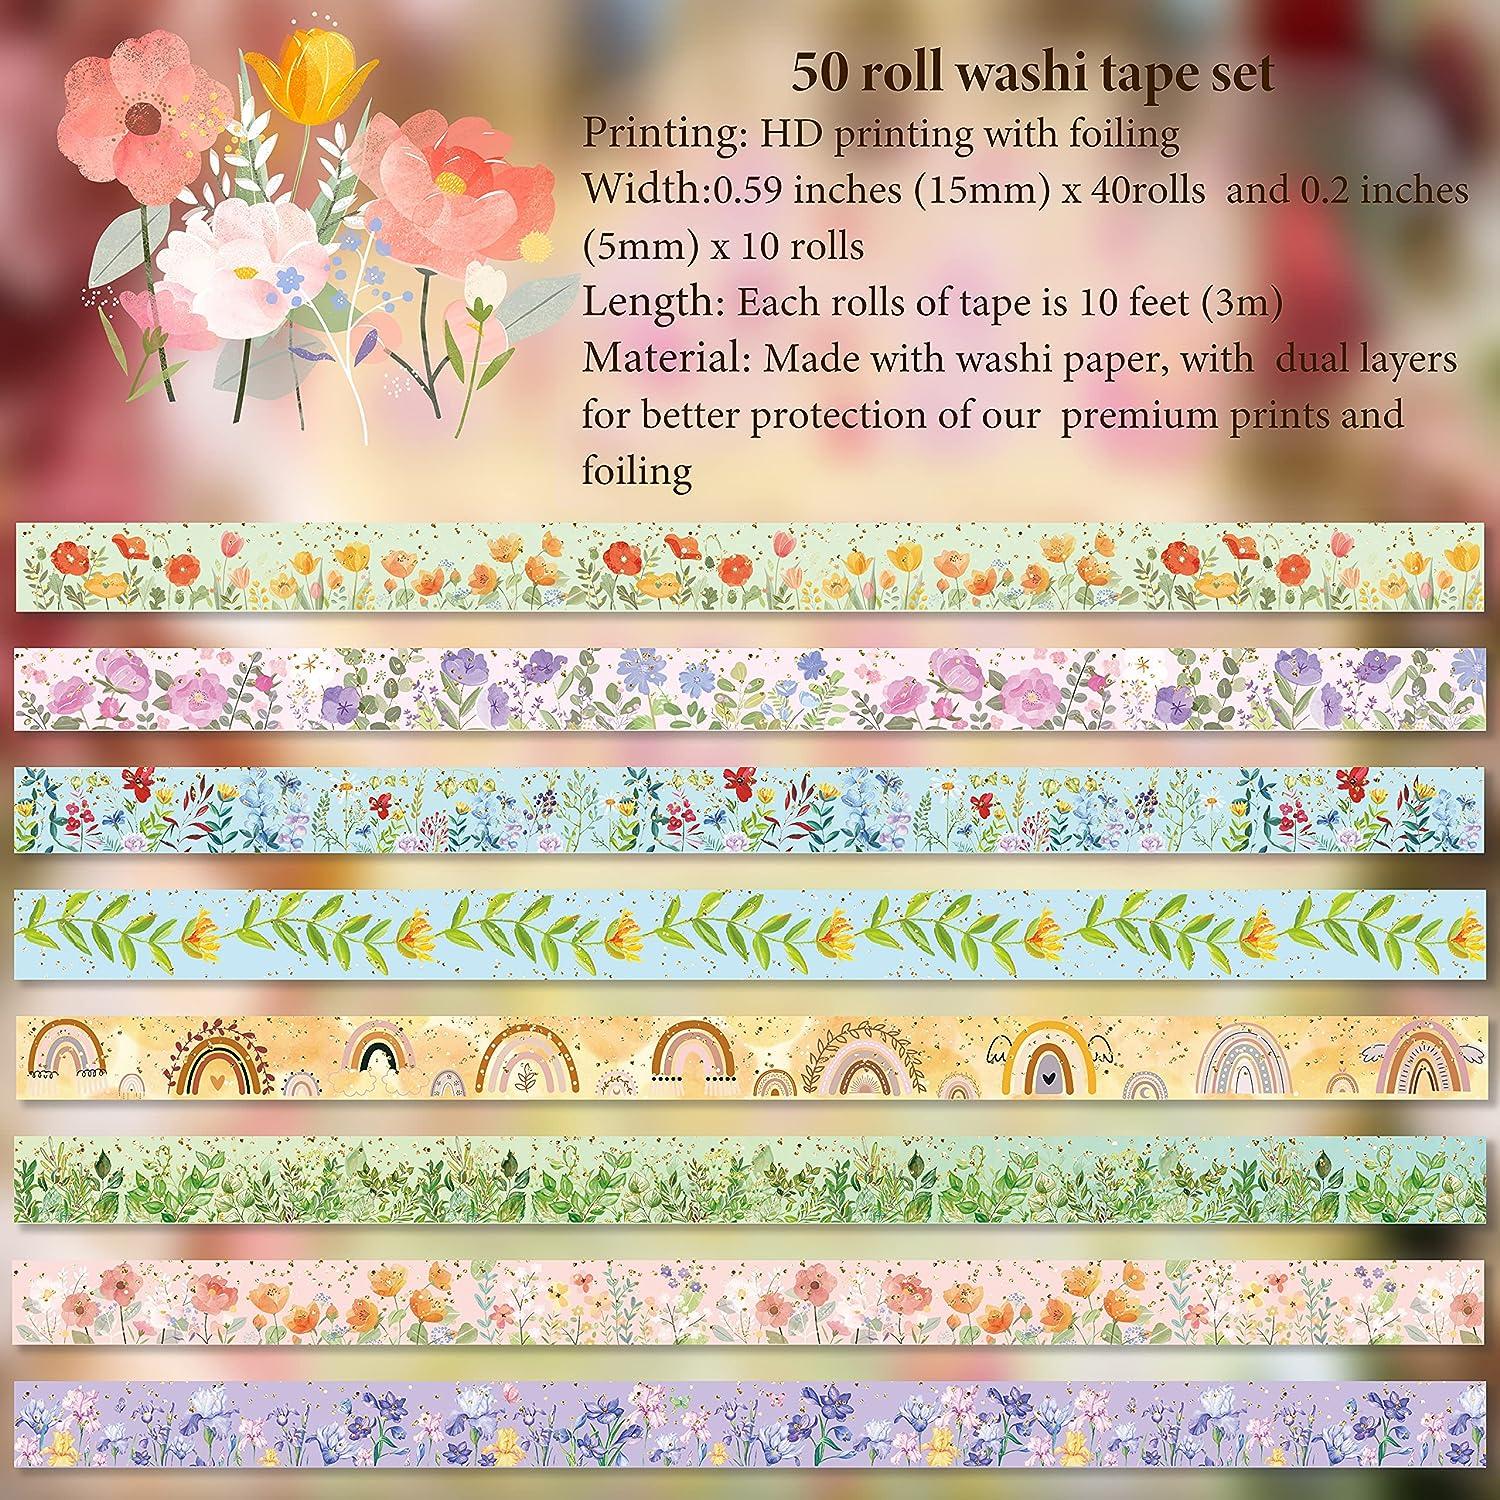 slapaflife 20 Rolls Washi Tape Set, Witch & Magic Themed Decorative Tapes  for Journaling,Scrapbooking Supplies,Creative Washi Tape for